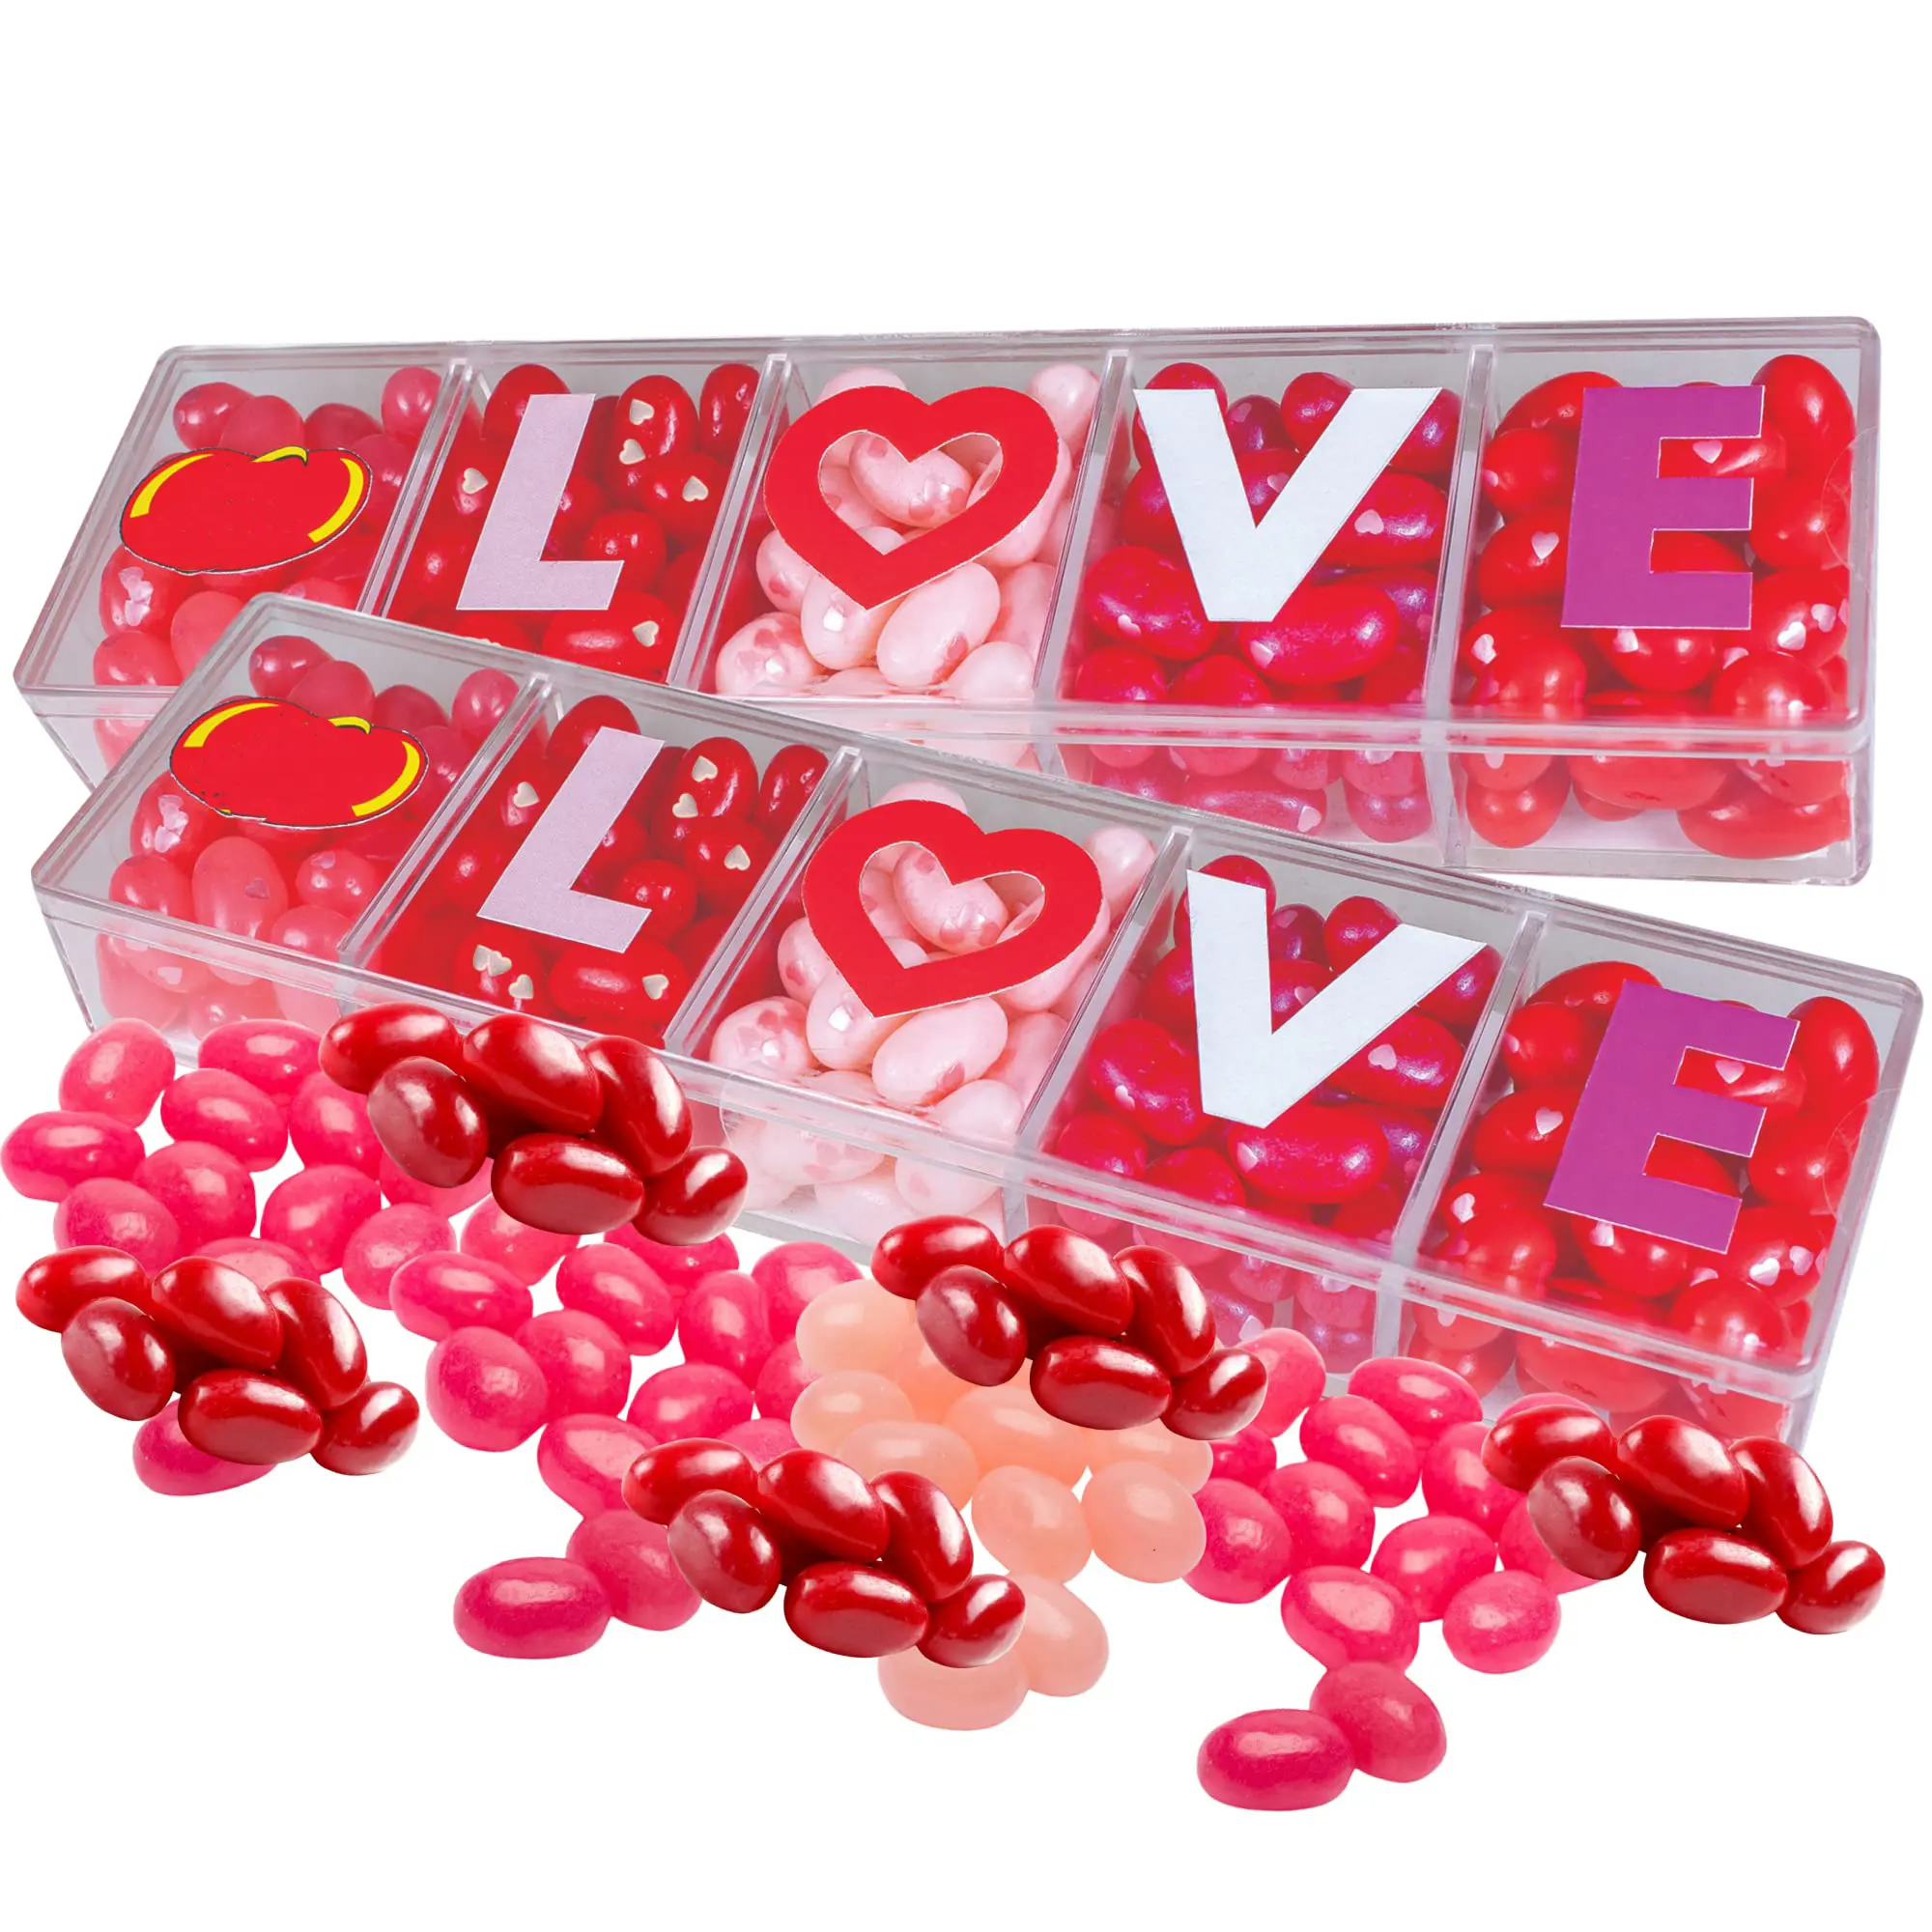 Small Love-Themed Low-sugar Valentine's Day Jelly Bean Candy For Party Heart Gift Box Pieces Wedding Shower